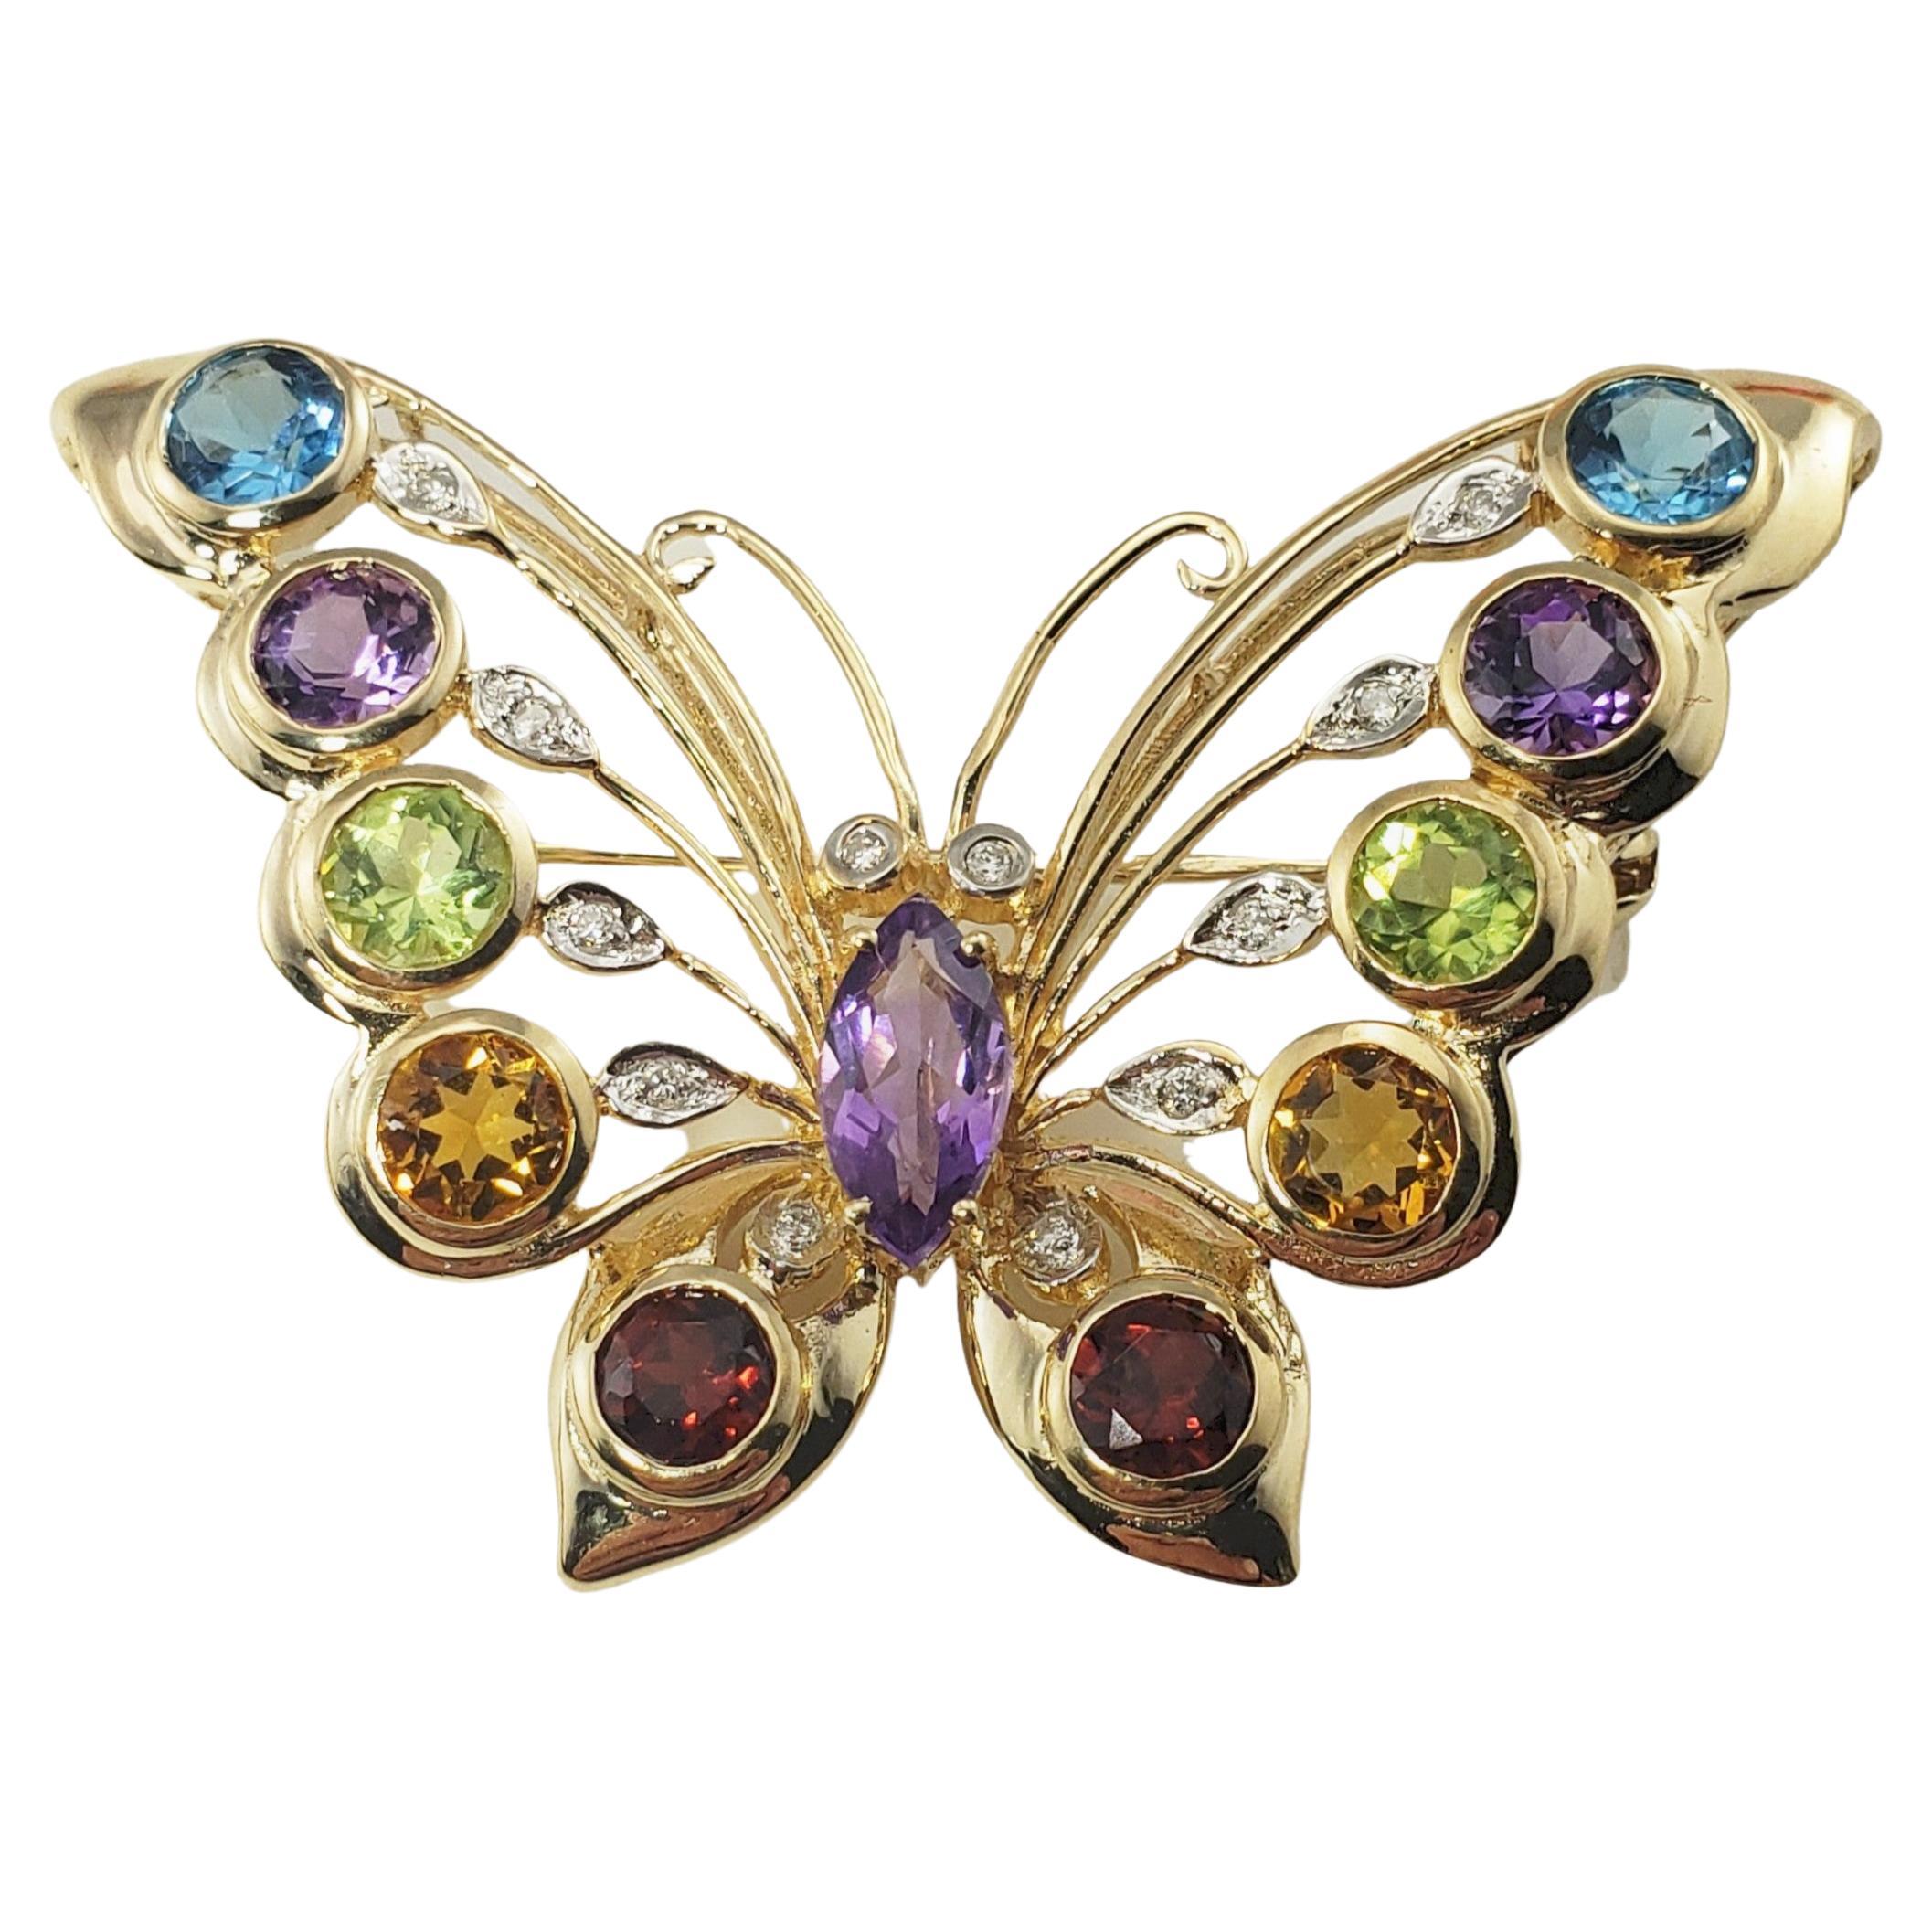 14 Karat Yellow Gold and Gemstone Butterfly Brooch / Pin